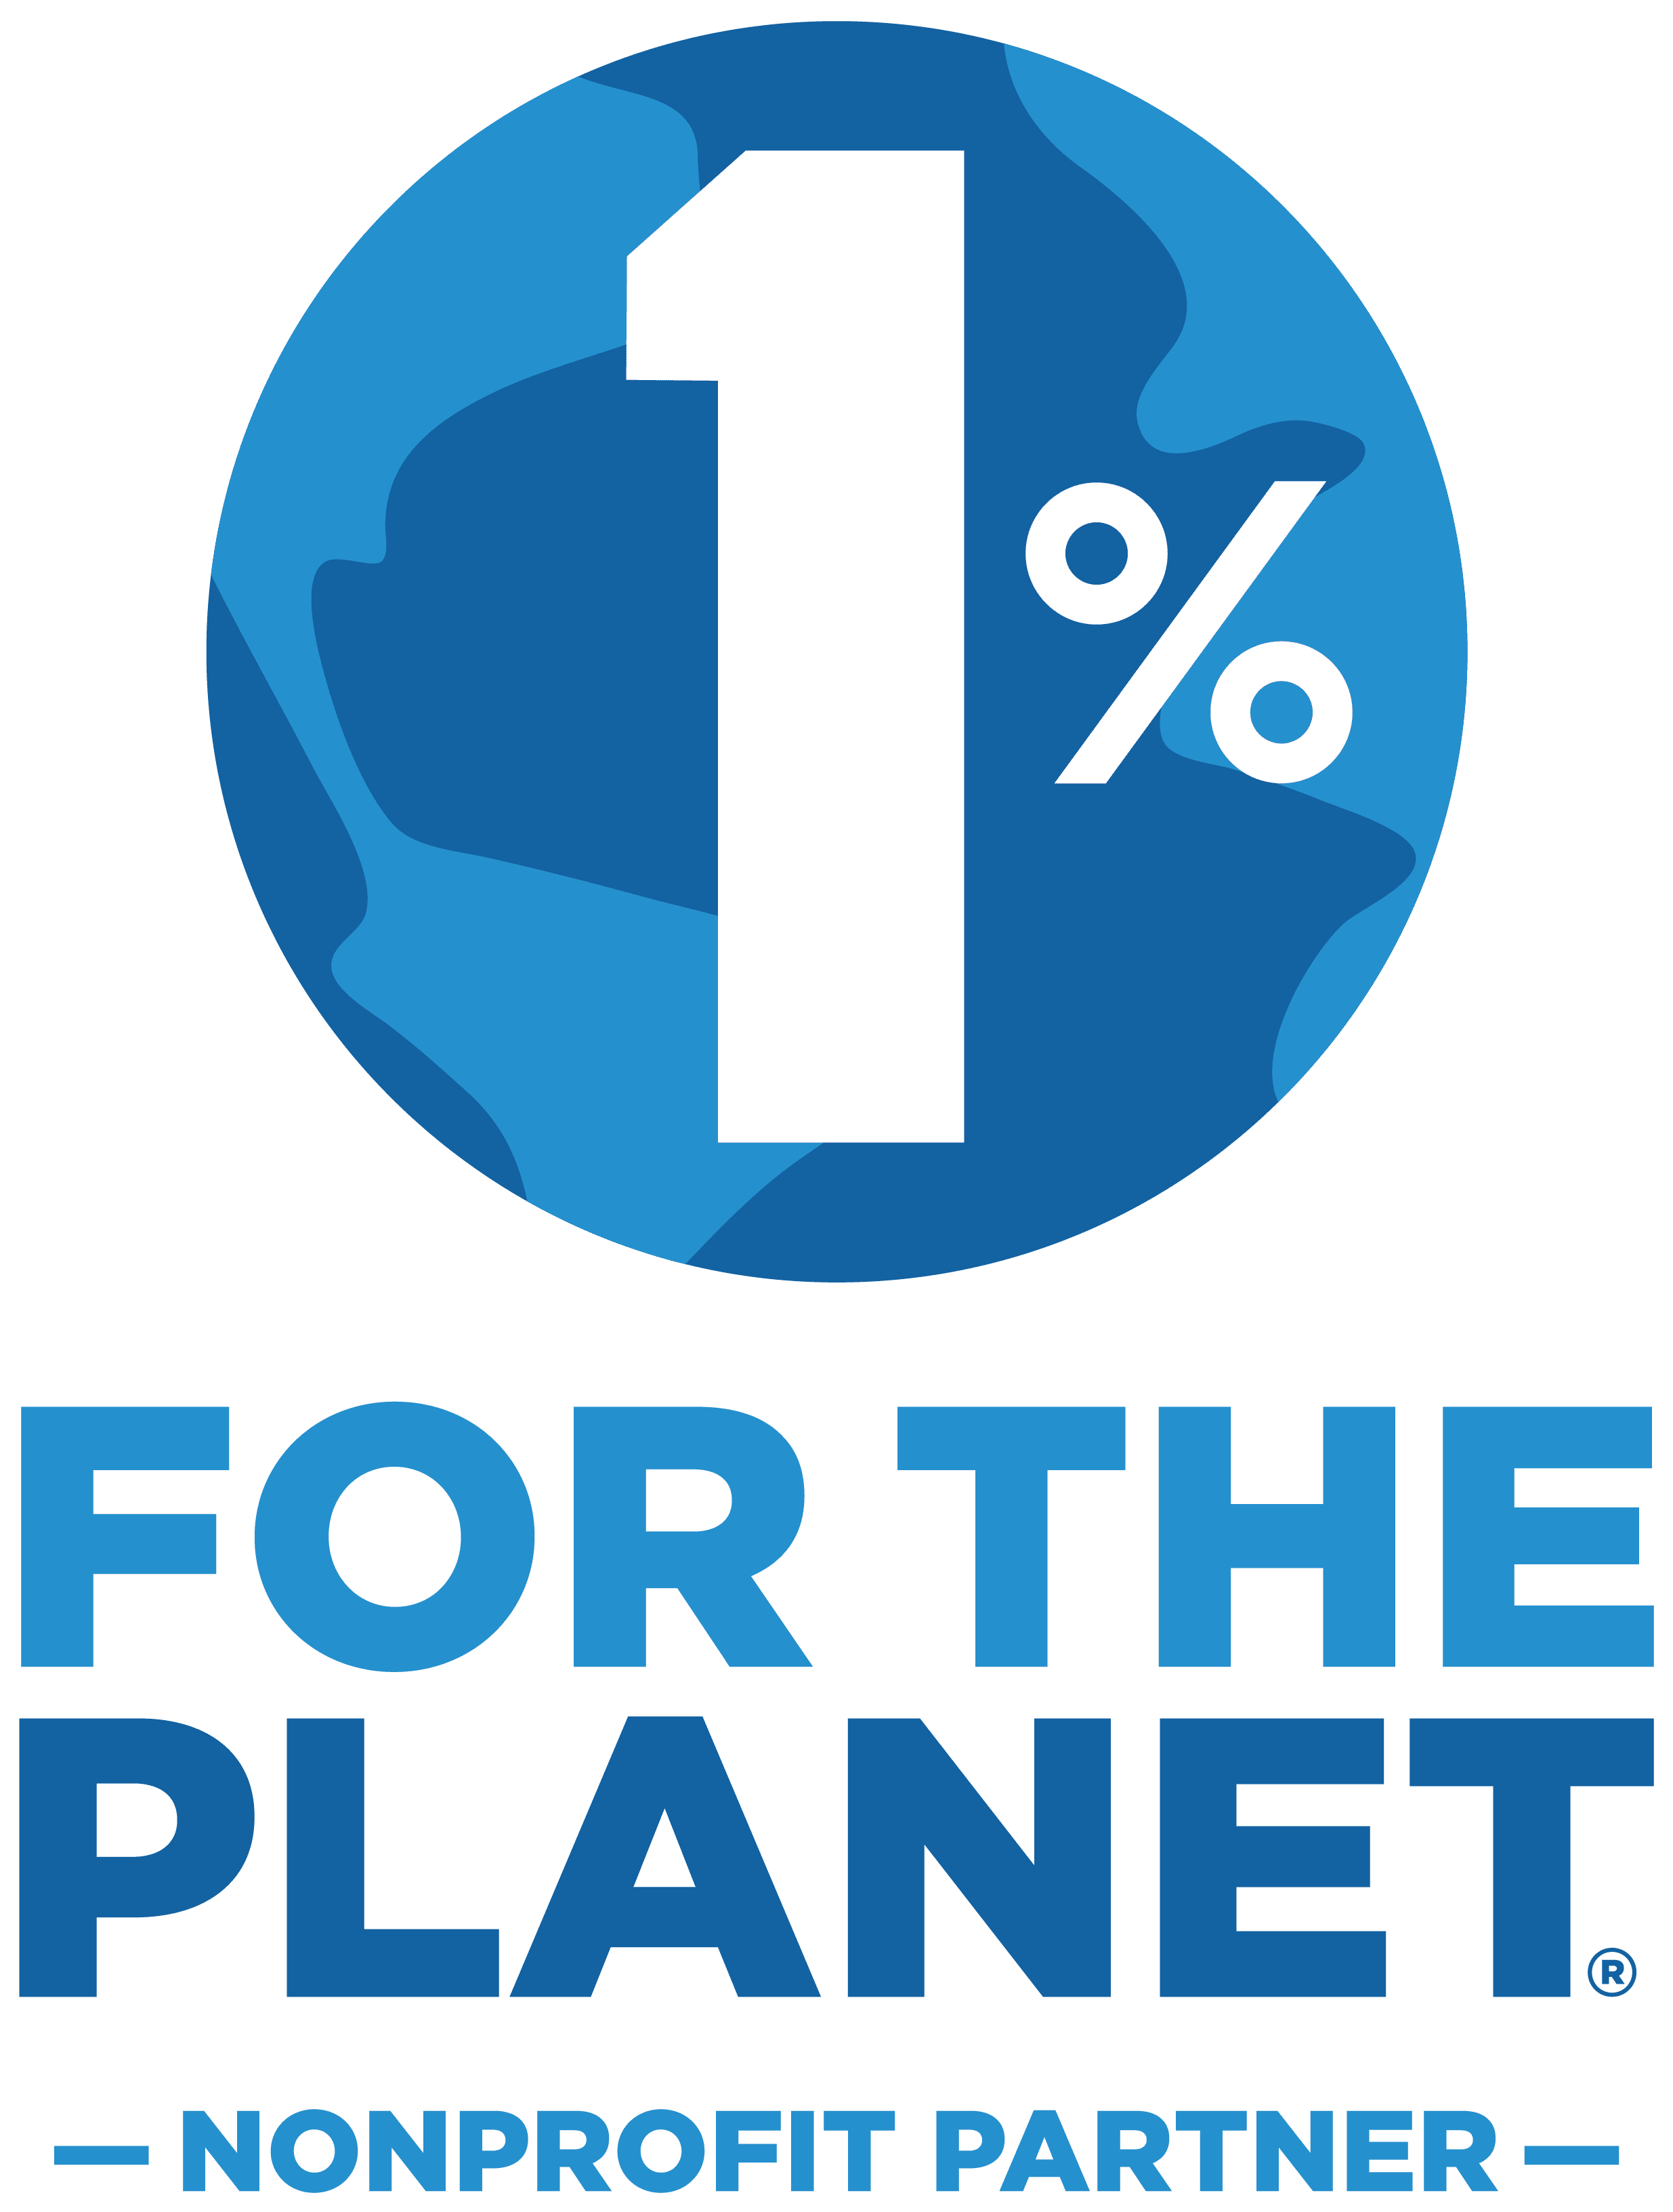 1% For the Planet Home Link